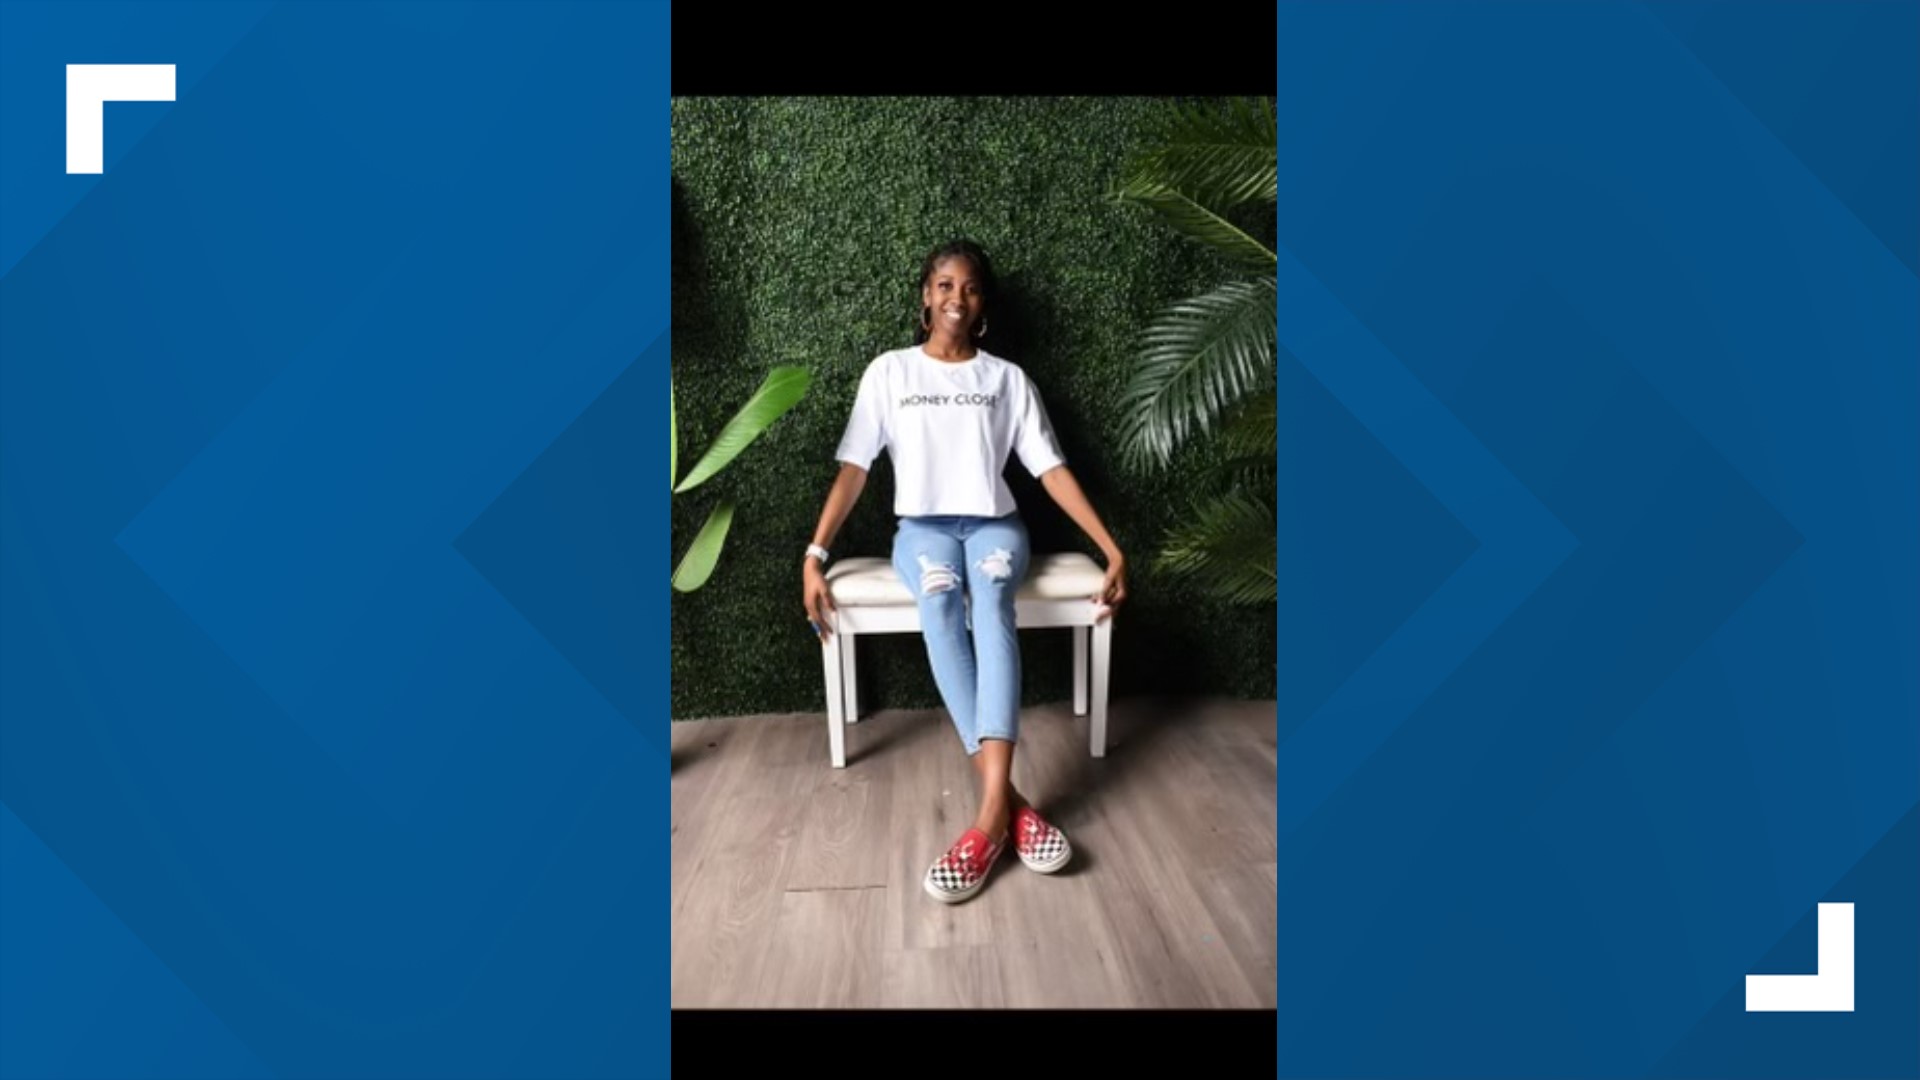 Shaumari Fluellen's sister, Coco, says the 20-year-old called her after getting in a car crash. She later died. Now, her family is trying to live out her legacy.